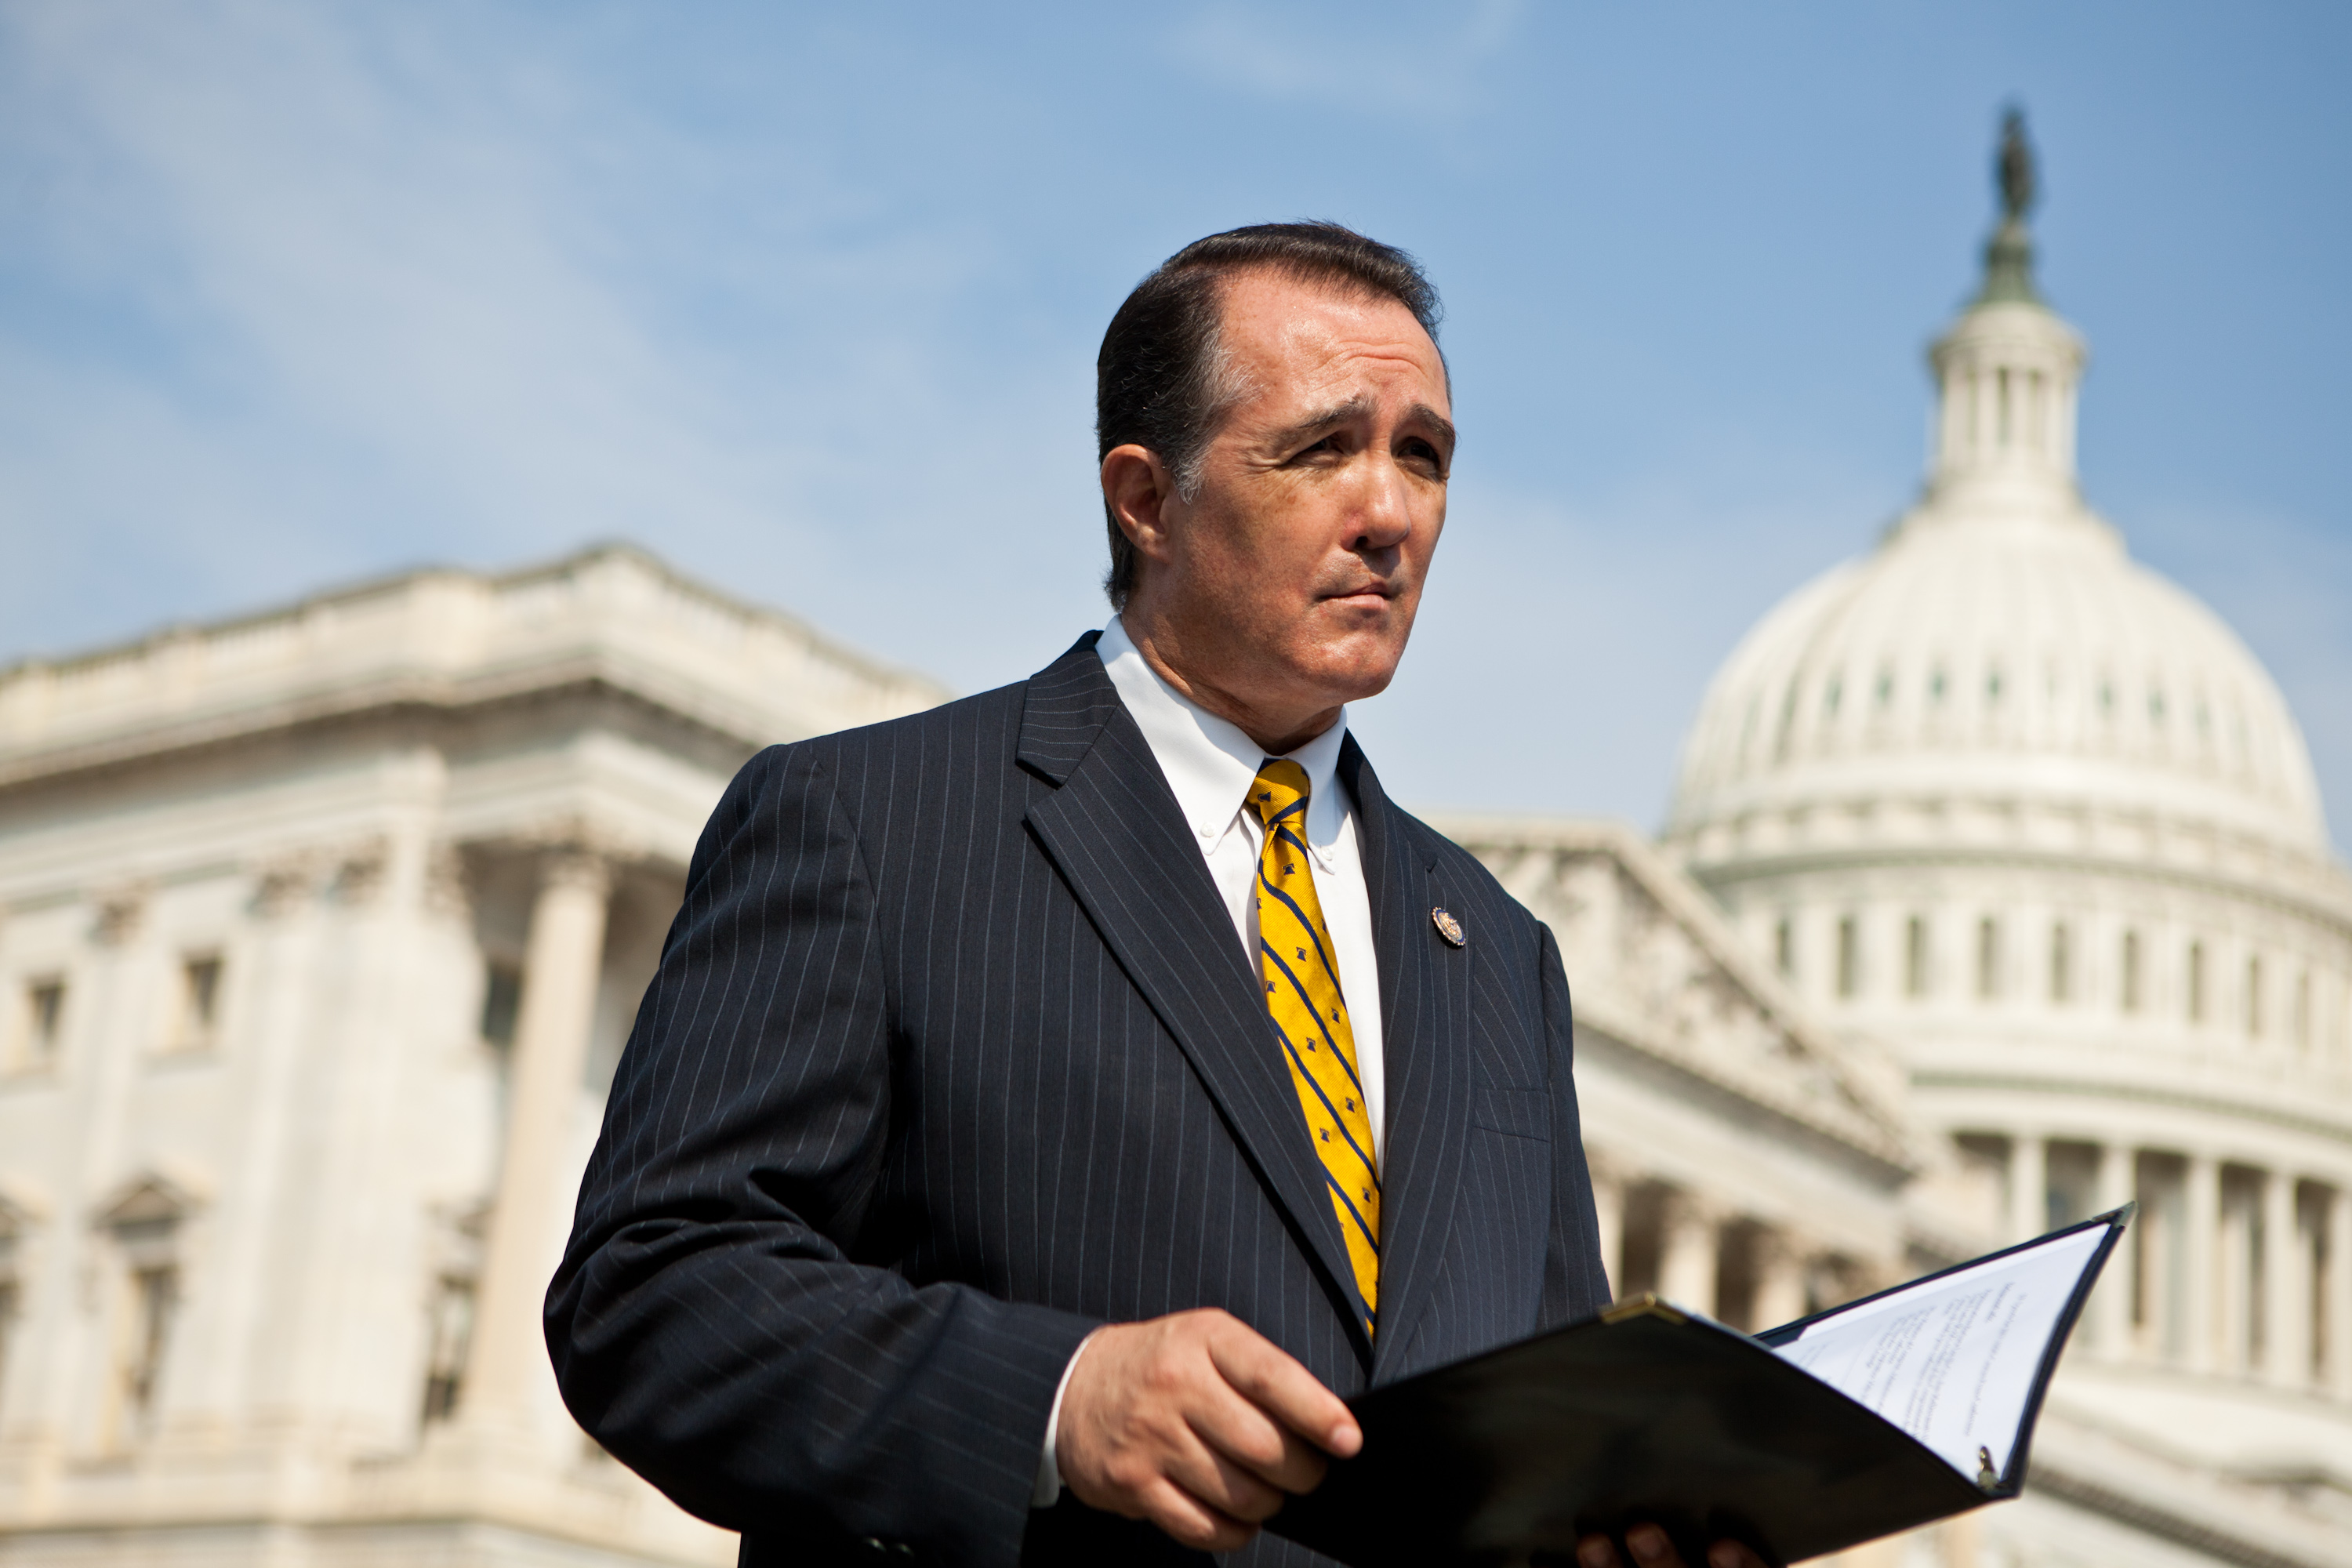 Rep. Trent Franks (R-AZ) listens during a news conference for the launch of the Congressional HIV/AIDS Caucus on Capitol Hill on September 15, 2011 in Washington, DC. (Brendan Hoffman—Getty Images)